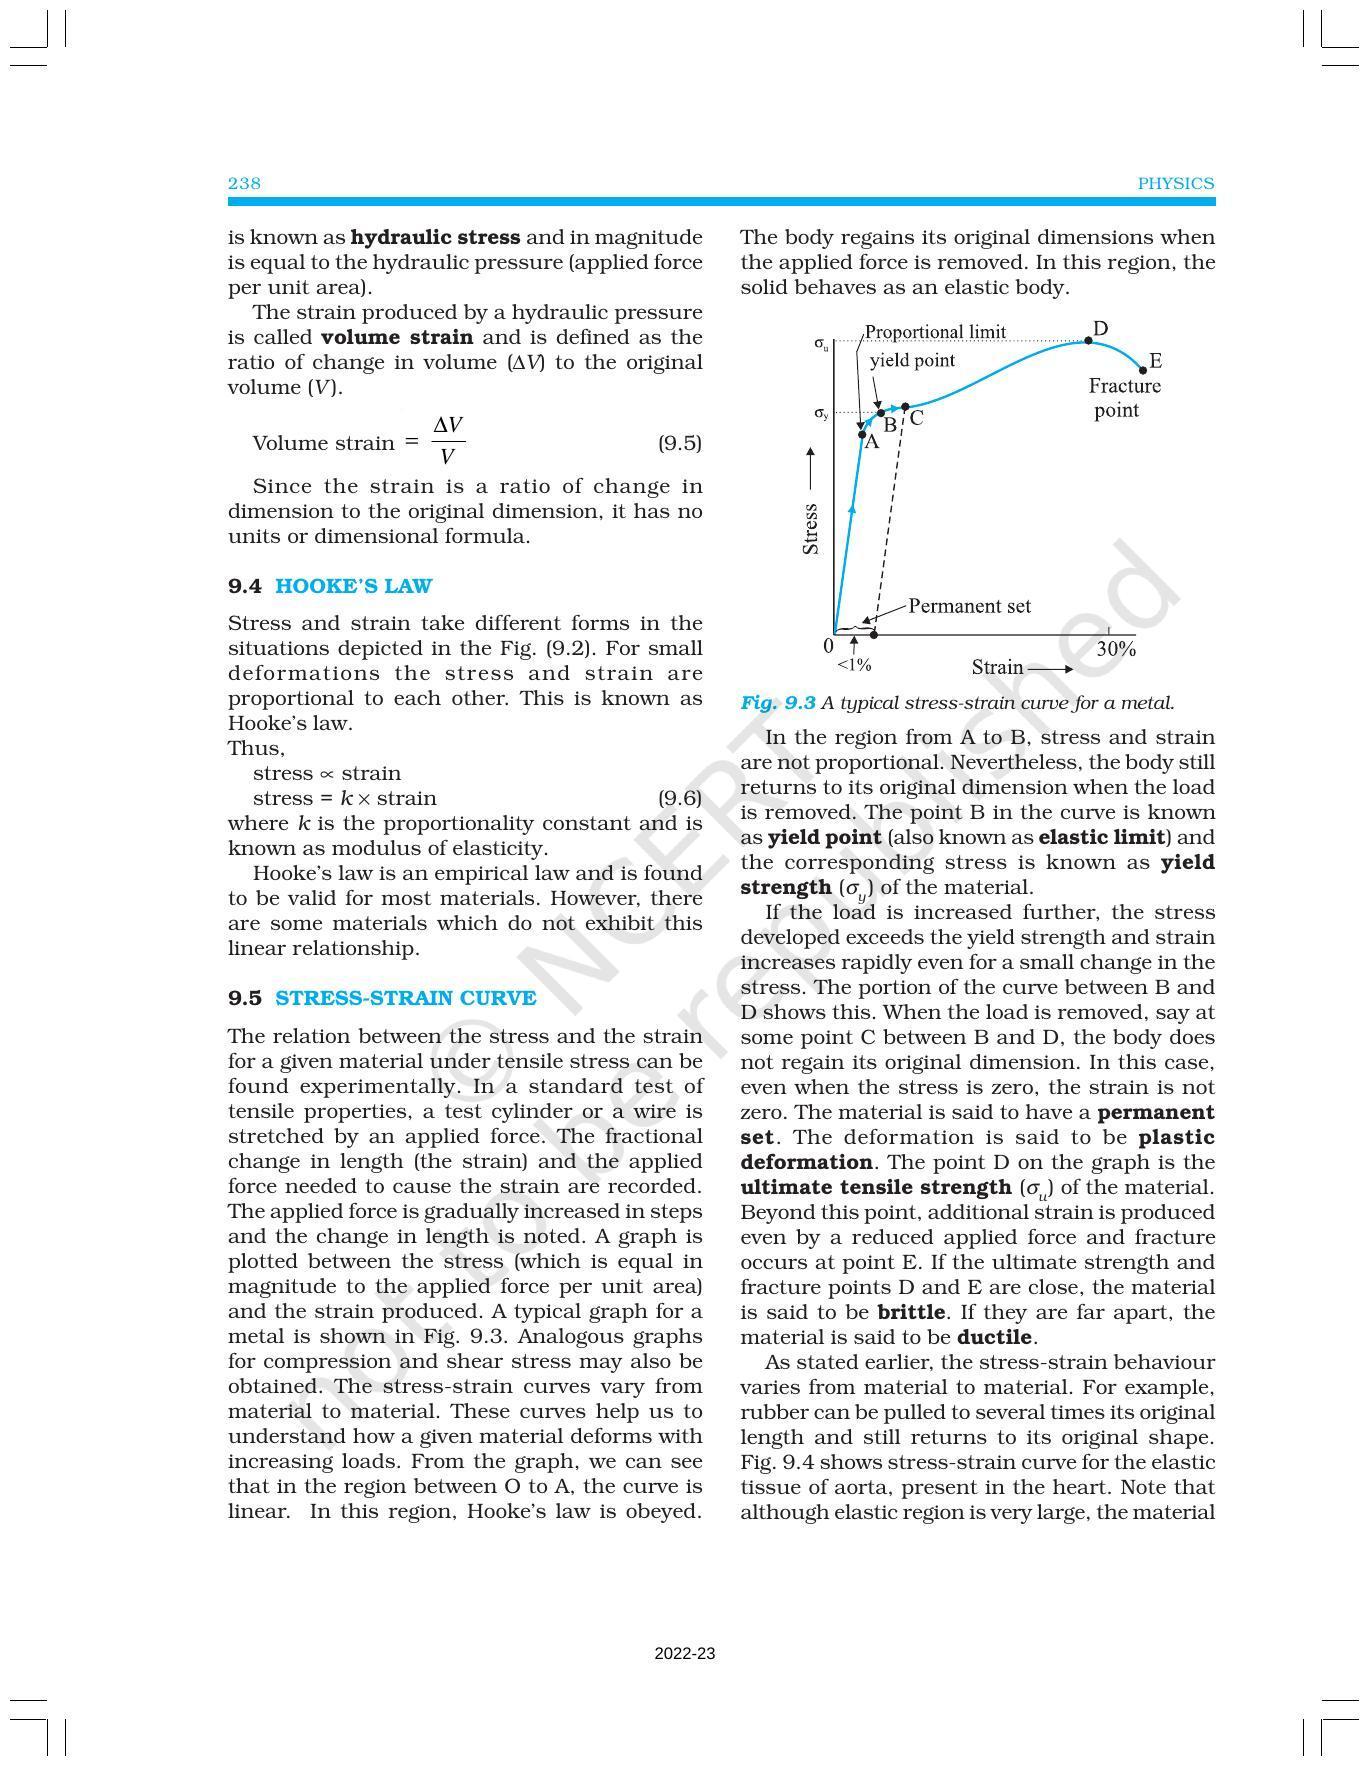 NCERT Book for Class 11 Physics Chapter 9 Mechanical Properties of Solids - Page 4